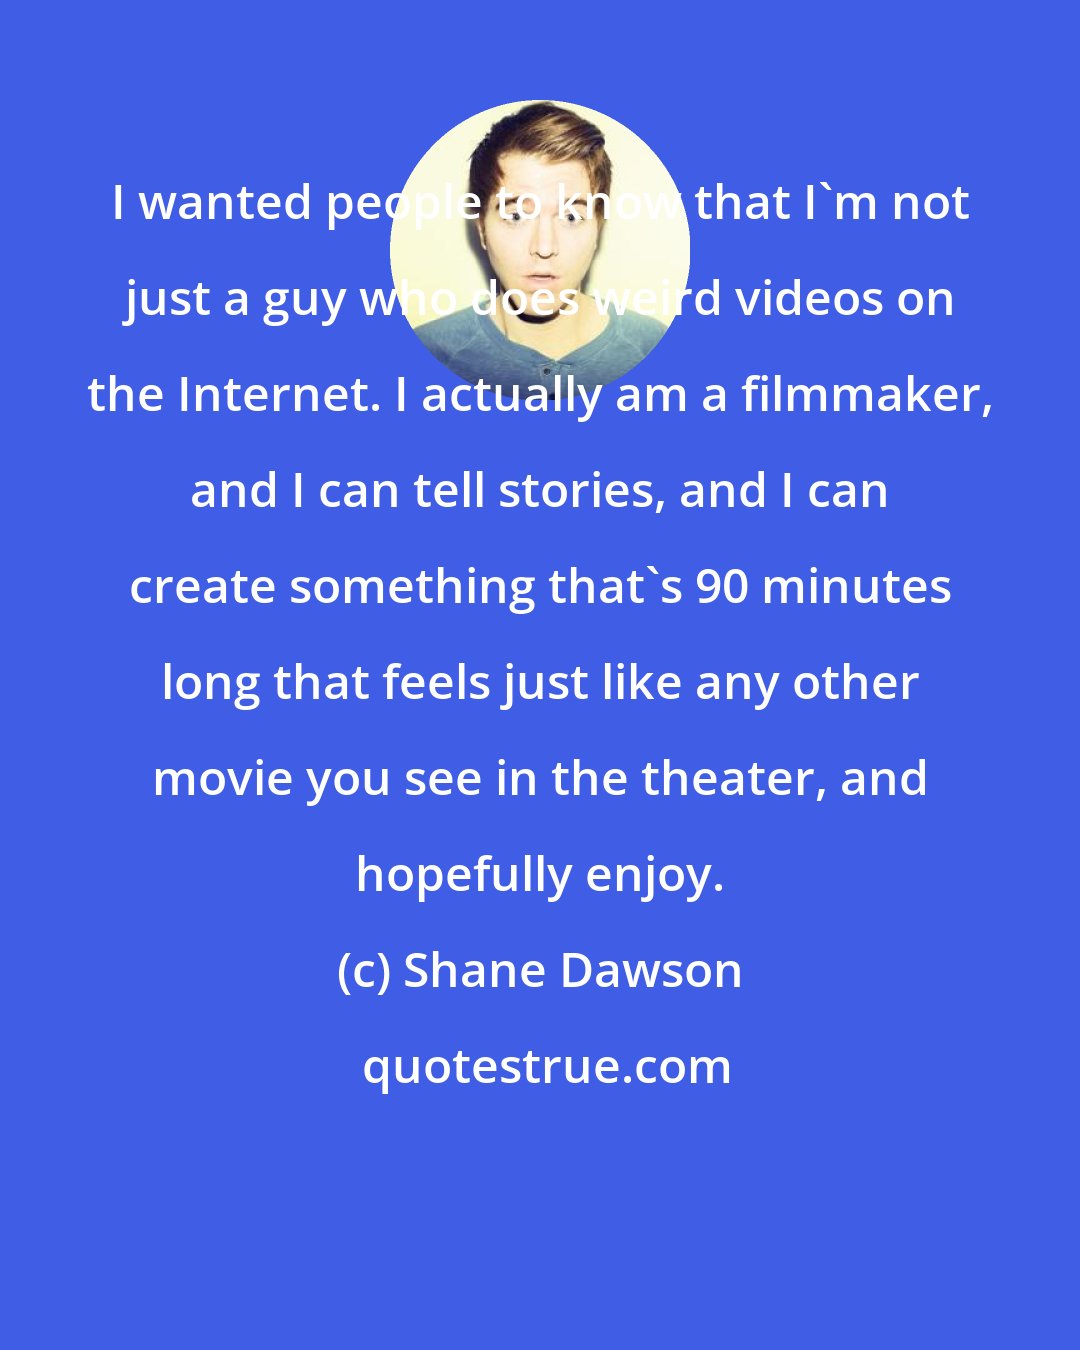 Shane Dawson: I wanted people to know that I'm not just a guy who does weird videos on the Internet. I actually am a filmmaker, and I can tell stories, and I can create something that's 90 minutes long that feels just like any other movie you see in the theater, and hopefully enjoy.